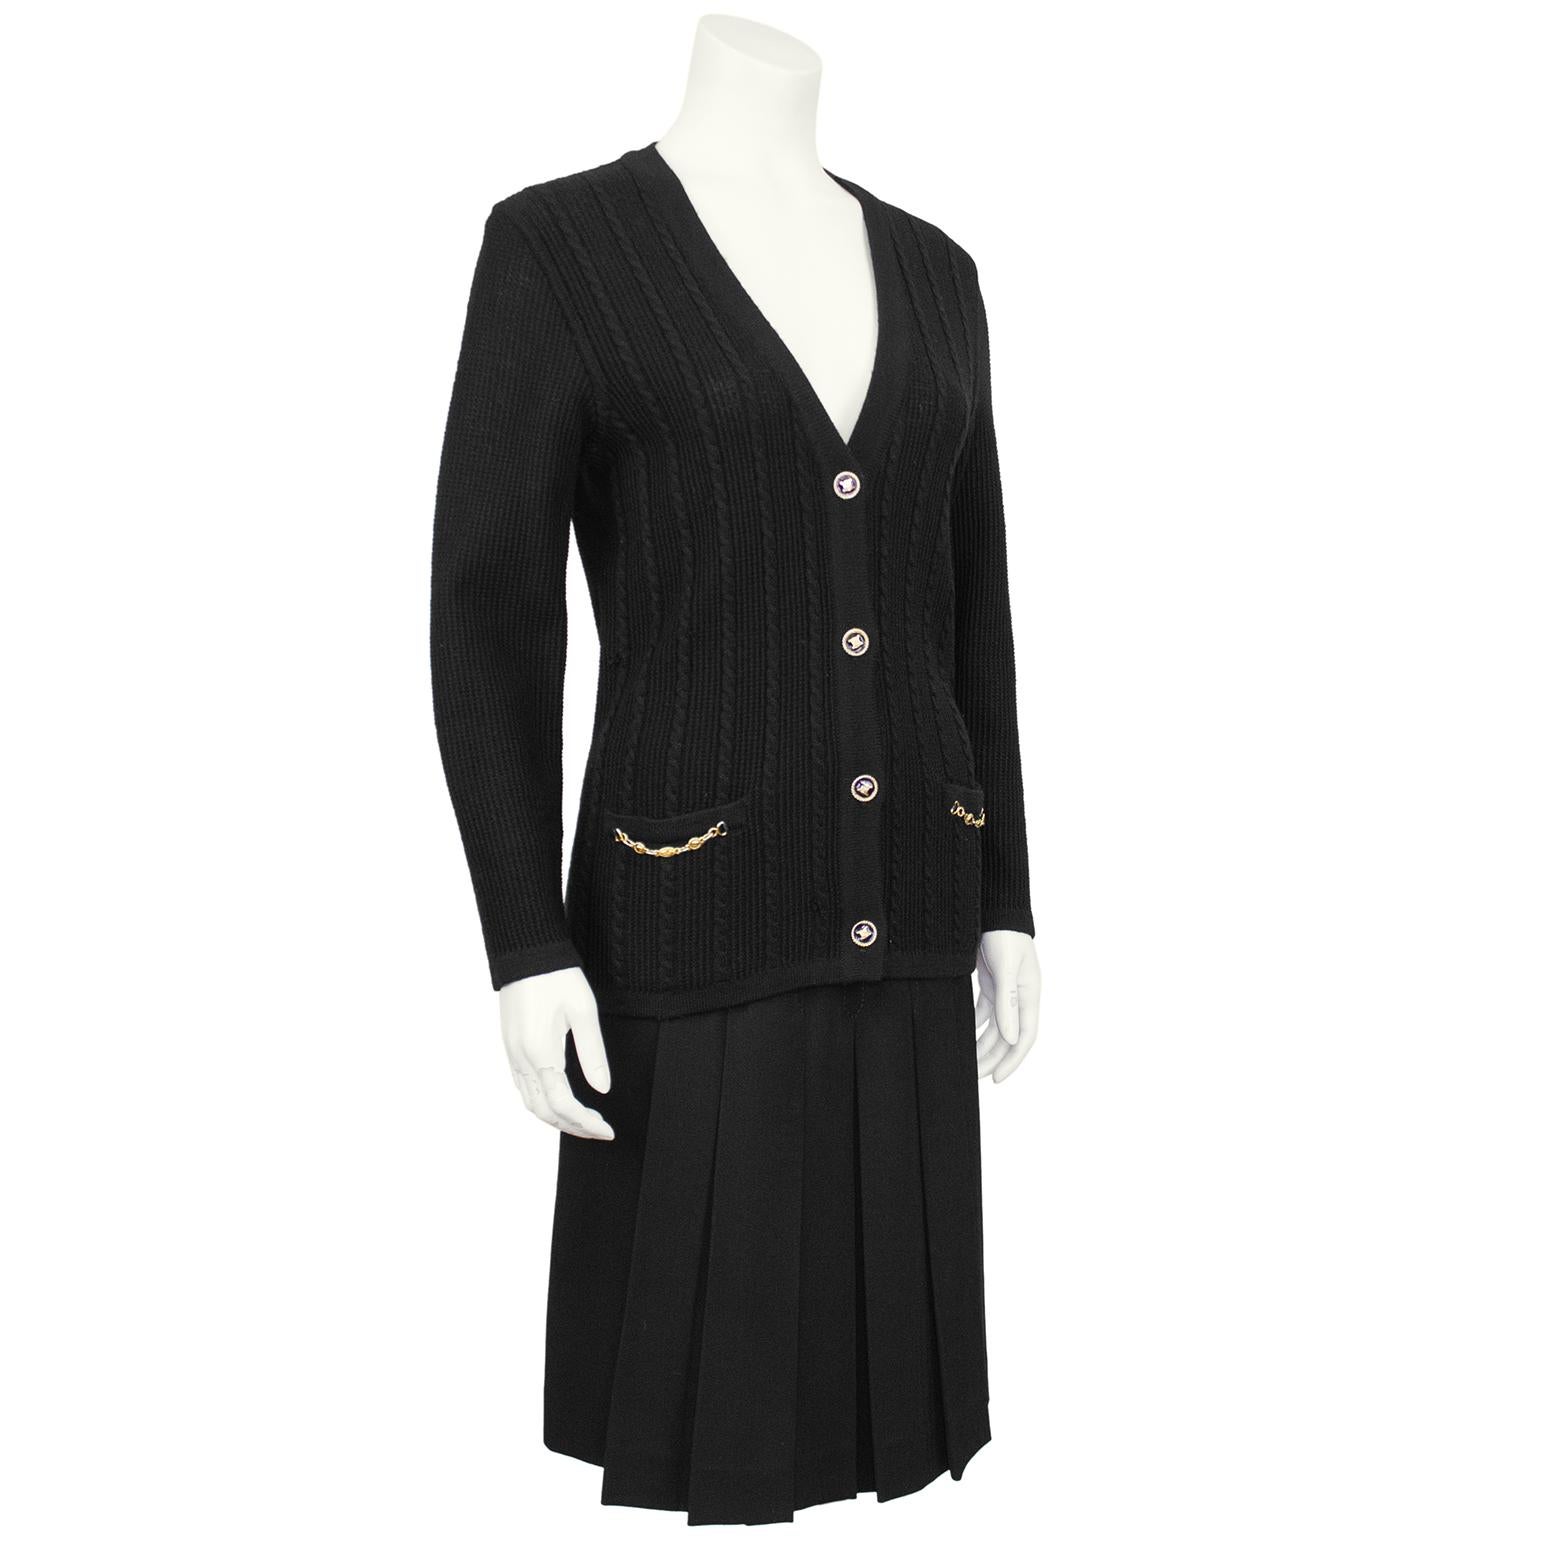 Classic and timeless Celine 100% wool black cardigan and gabardine skirt ensemble from the 1970's. The set features a cable knit and waffle v neck cardigan with gold tone metal accents. Slit pockets at the hips with chain details and beautiful gold